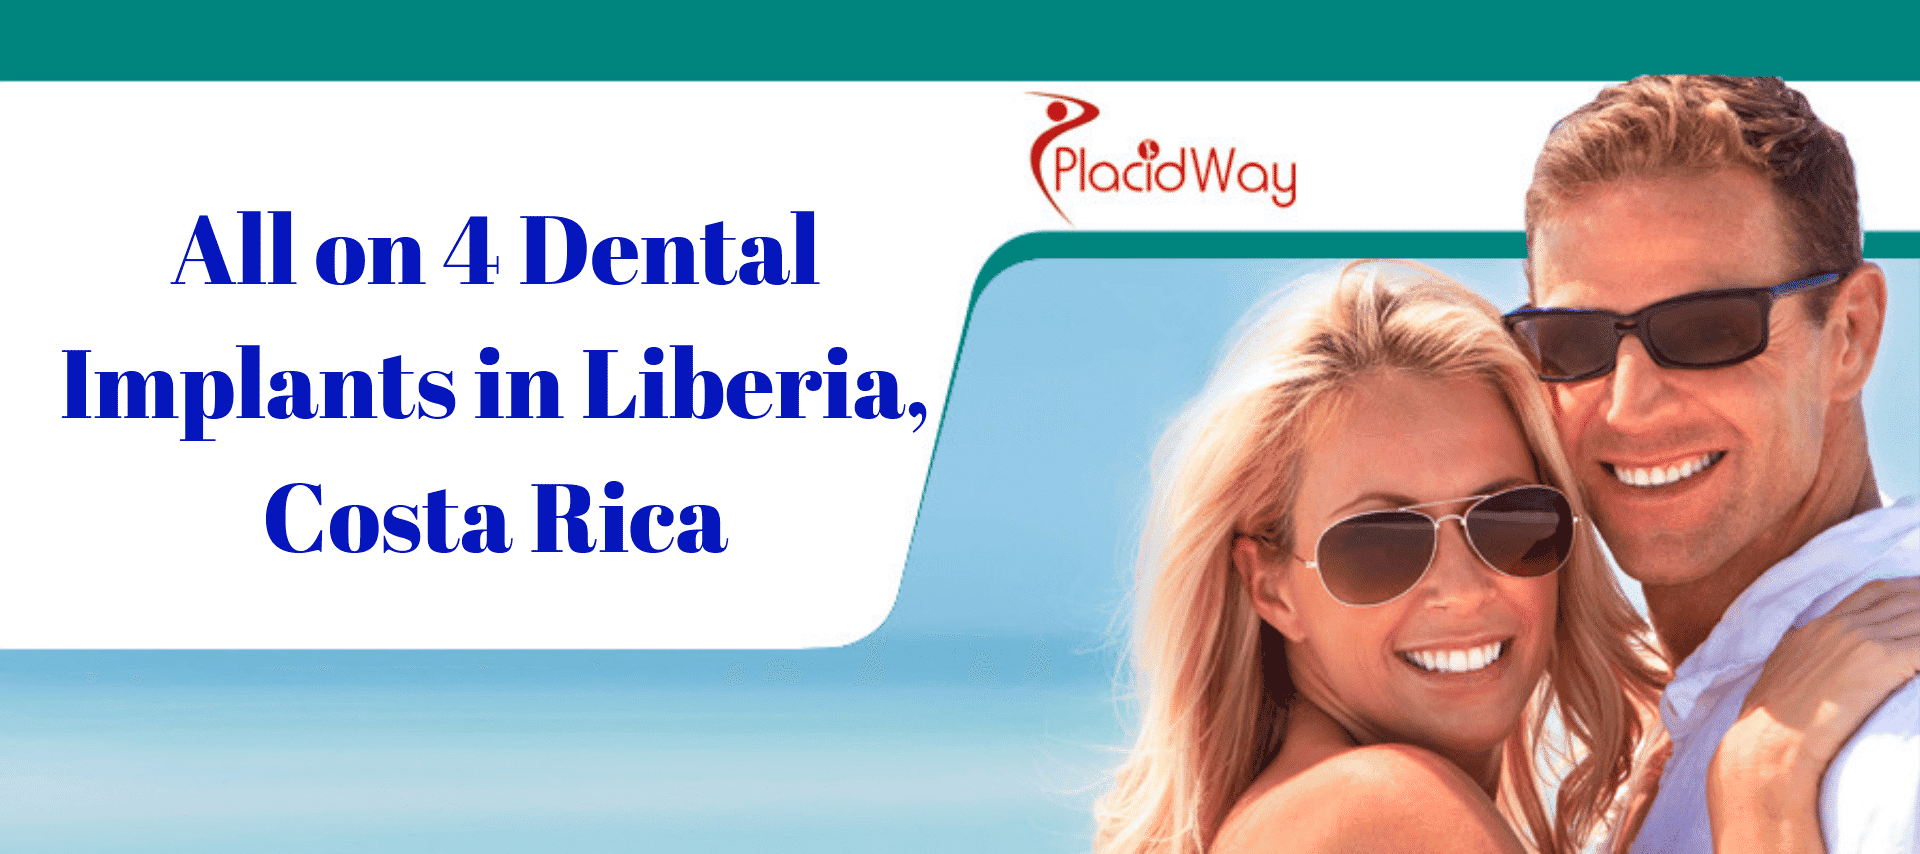 10 Best Questions to Ask before Going for All on 4 Dental Implants in Liberia, Costa Rica